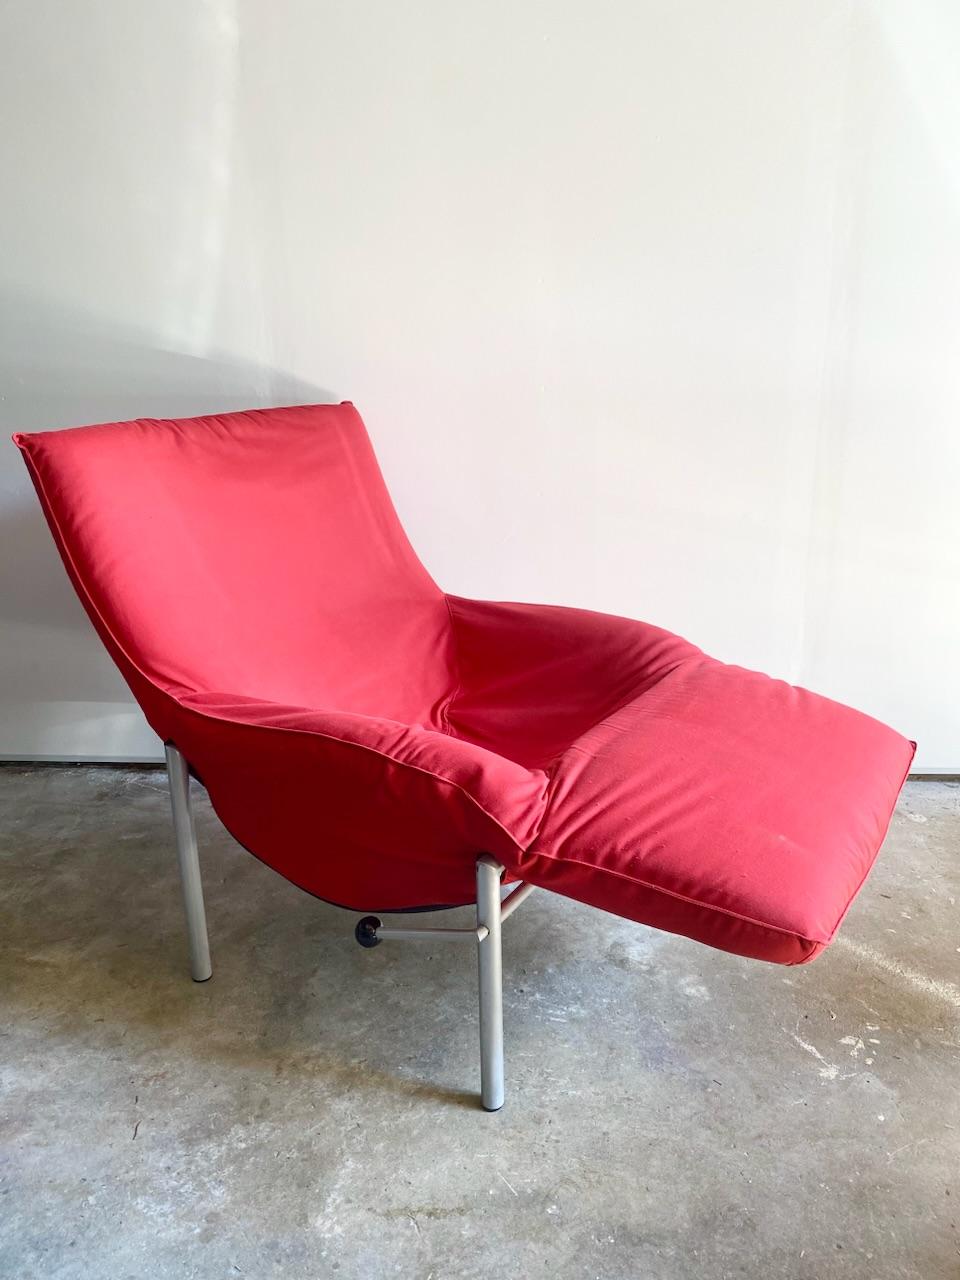 An excellent example of this iconic Tord Bjorklund chair, maybe taking its cues from vintage moveable Cassina pieces. The condition is very good, the structure and mechanism are in perfect working order, tilt mechanism is smooth and easy. Minor